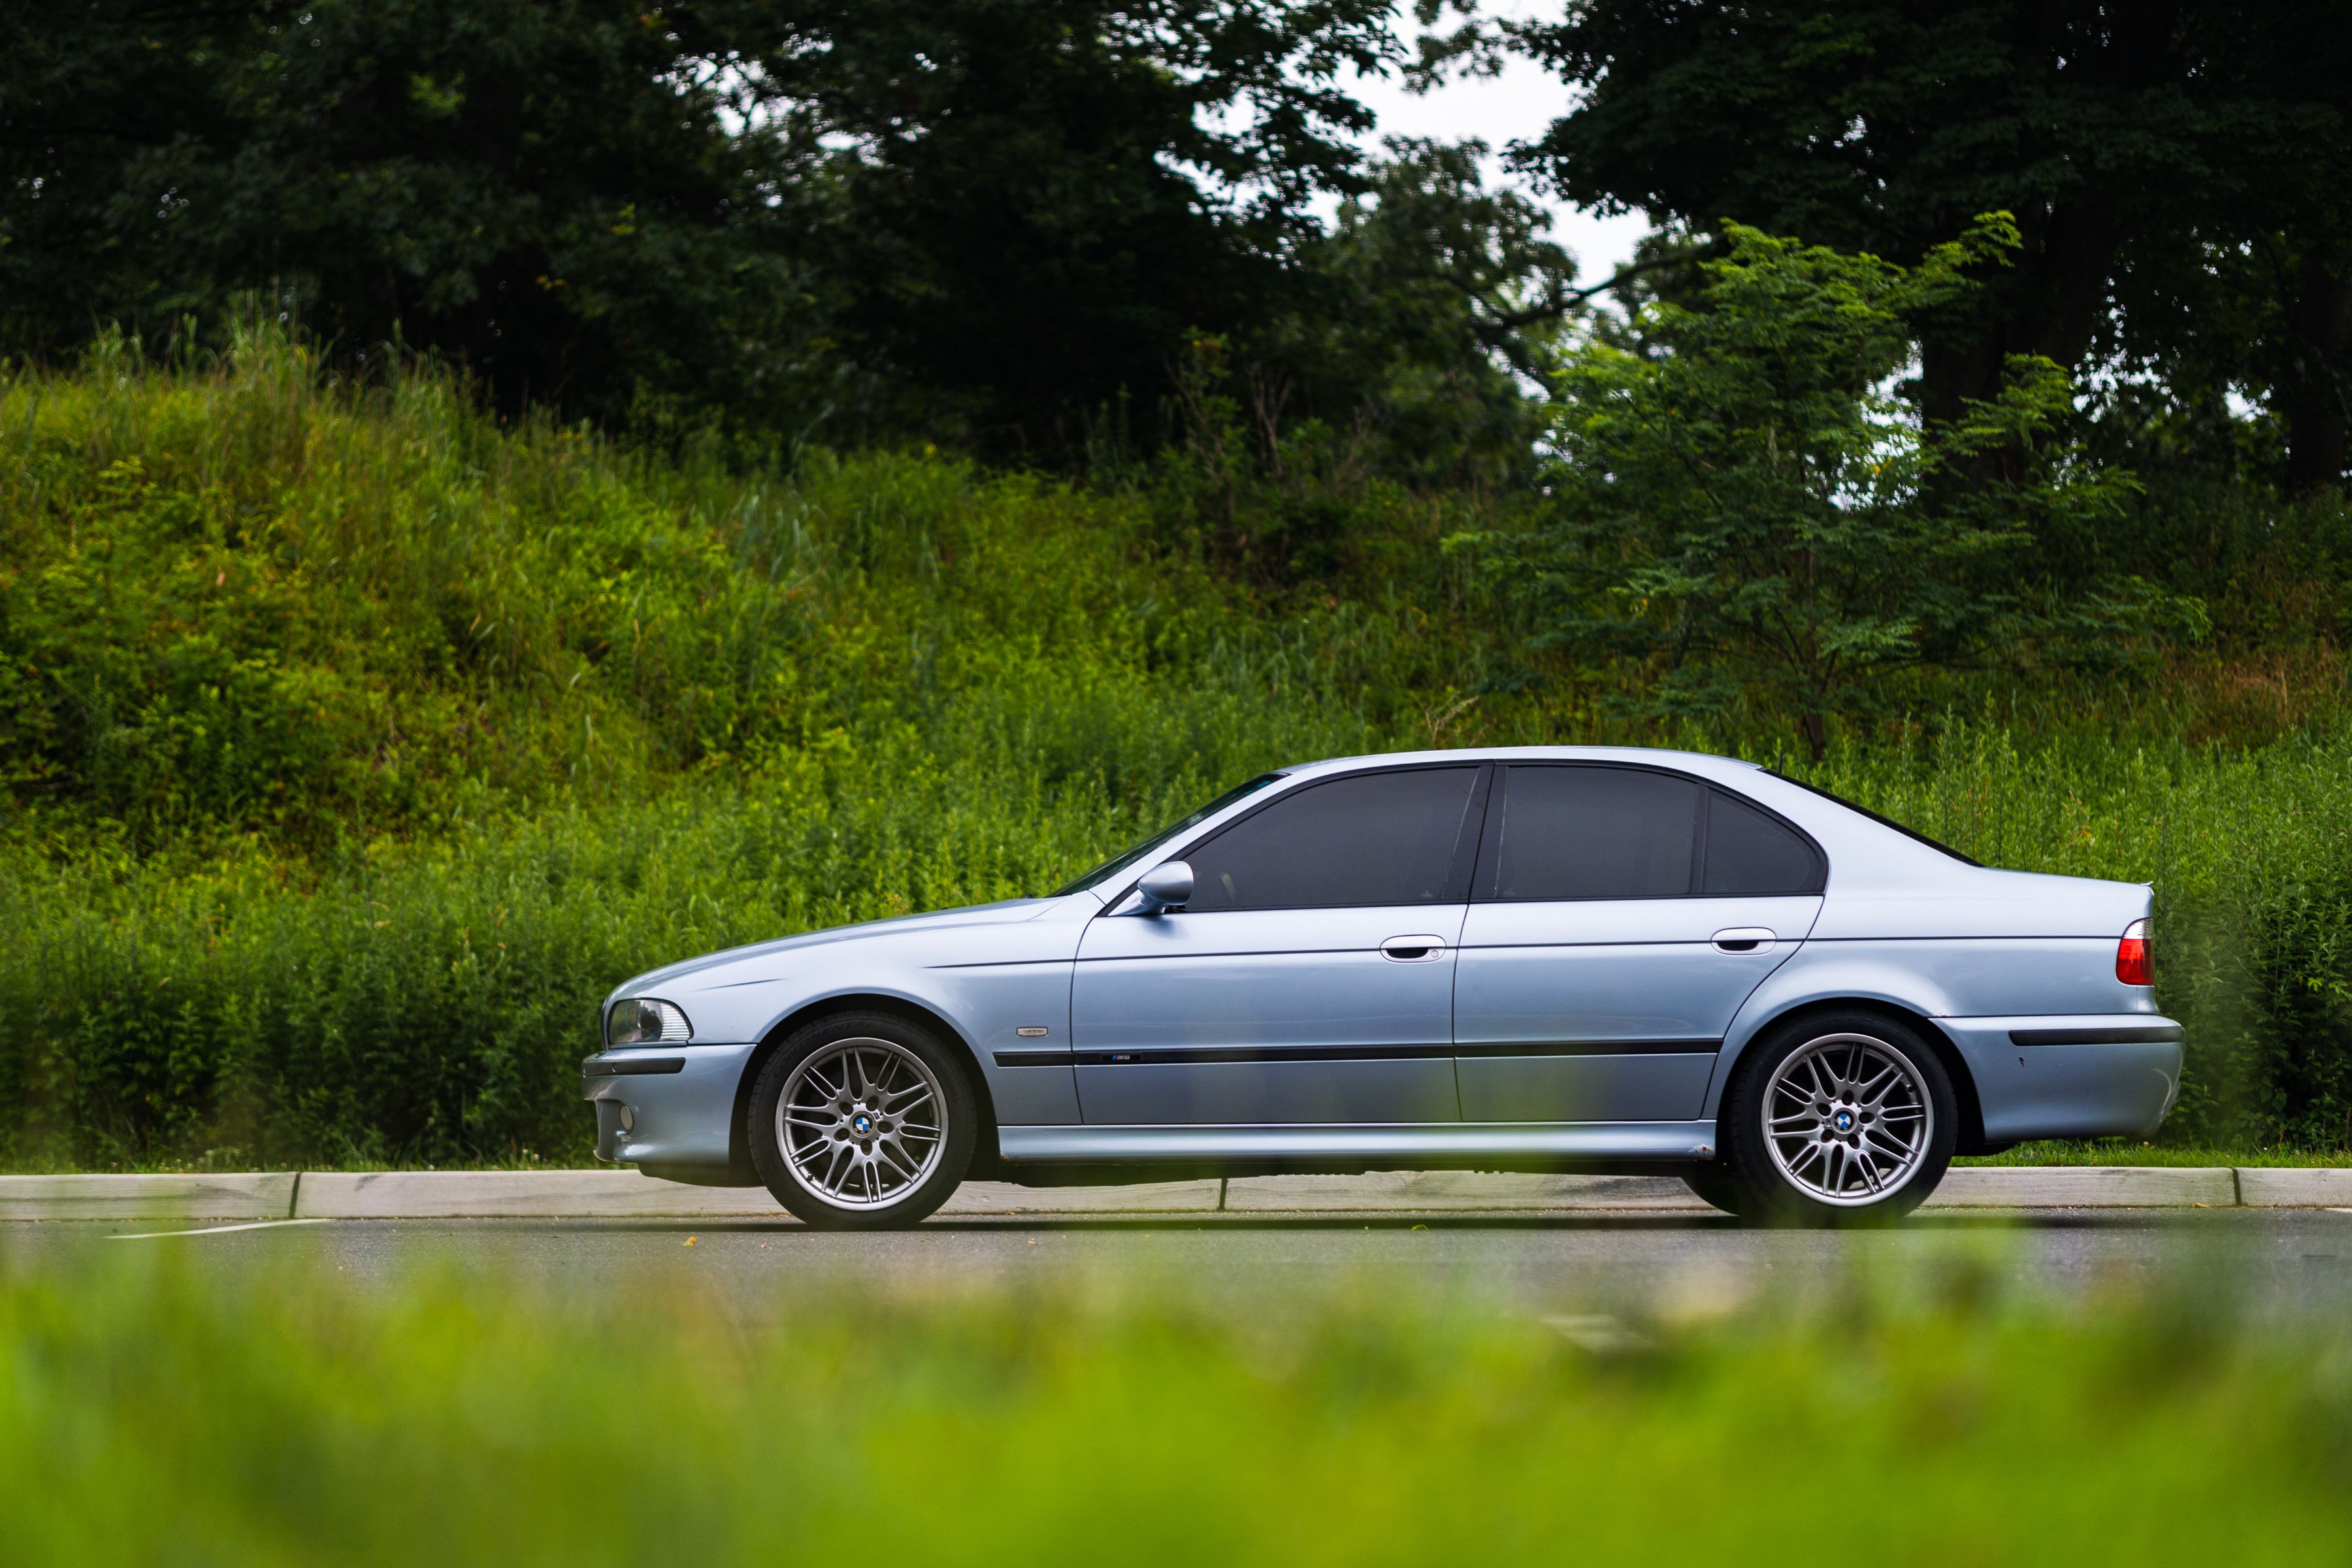 2002 BMW M5 E39 with 3,934 Miles for $67,990 is Mmm or Meh